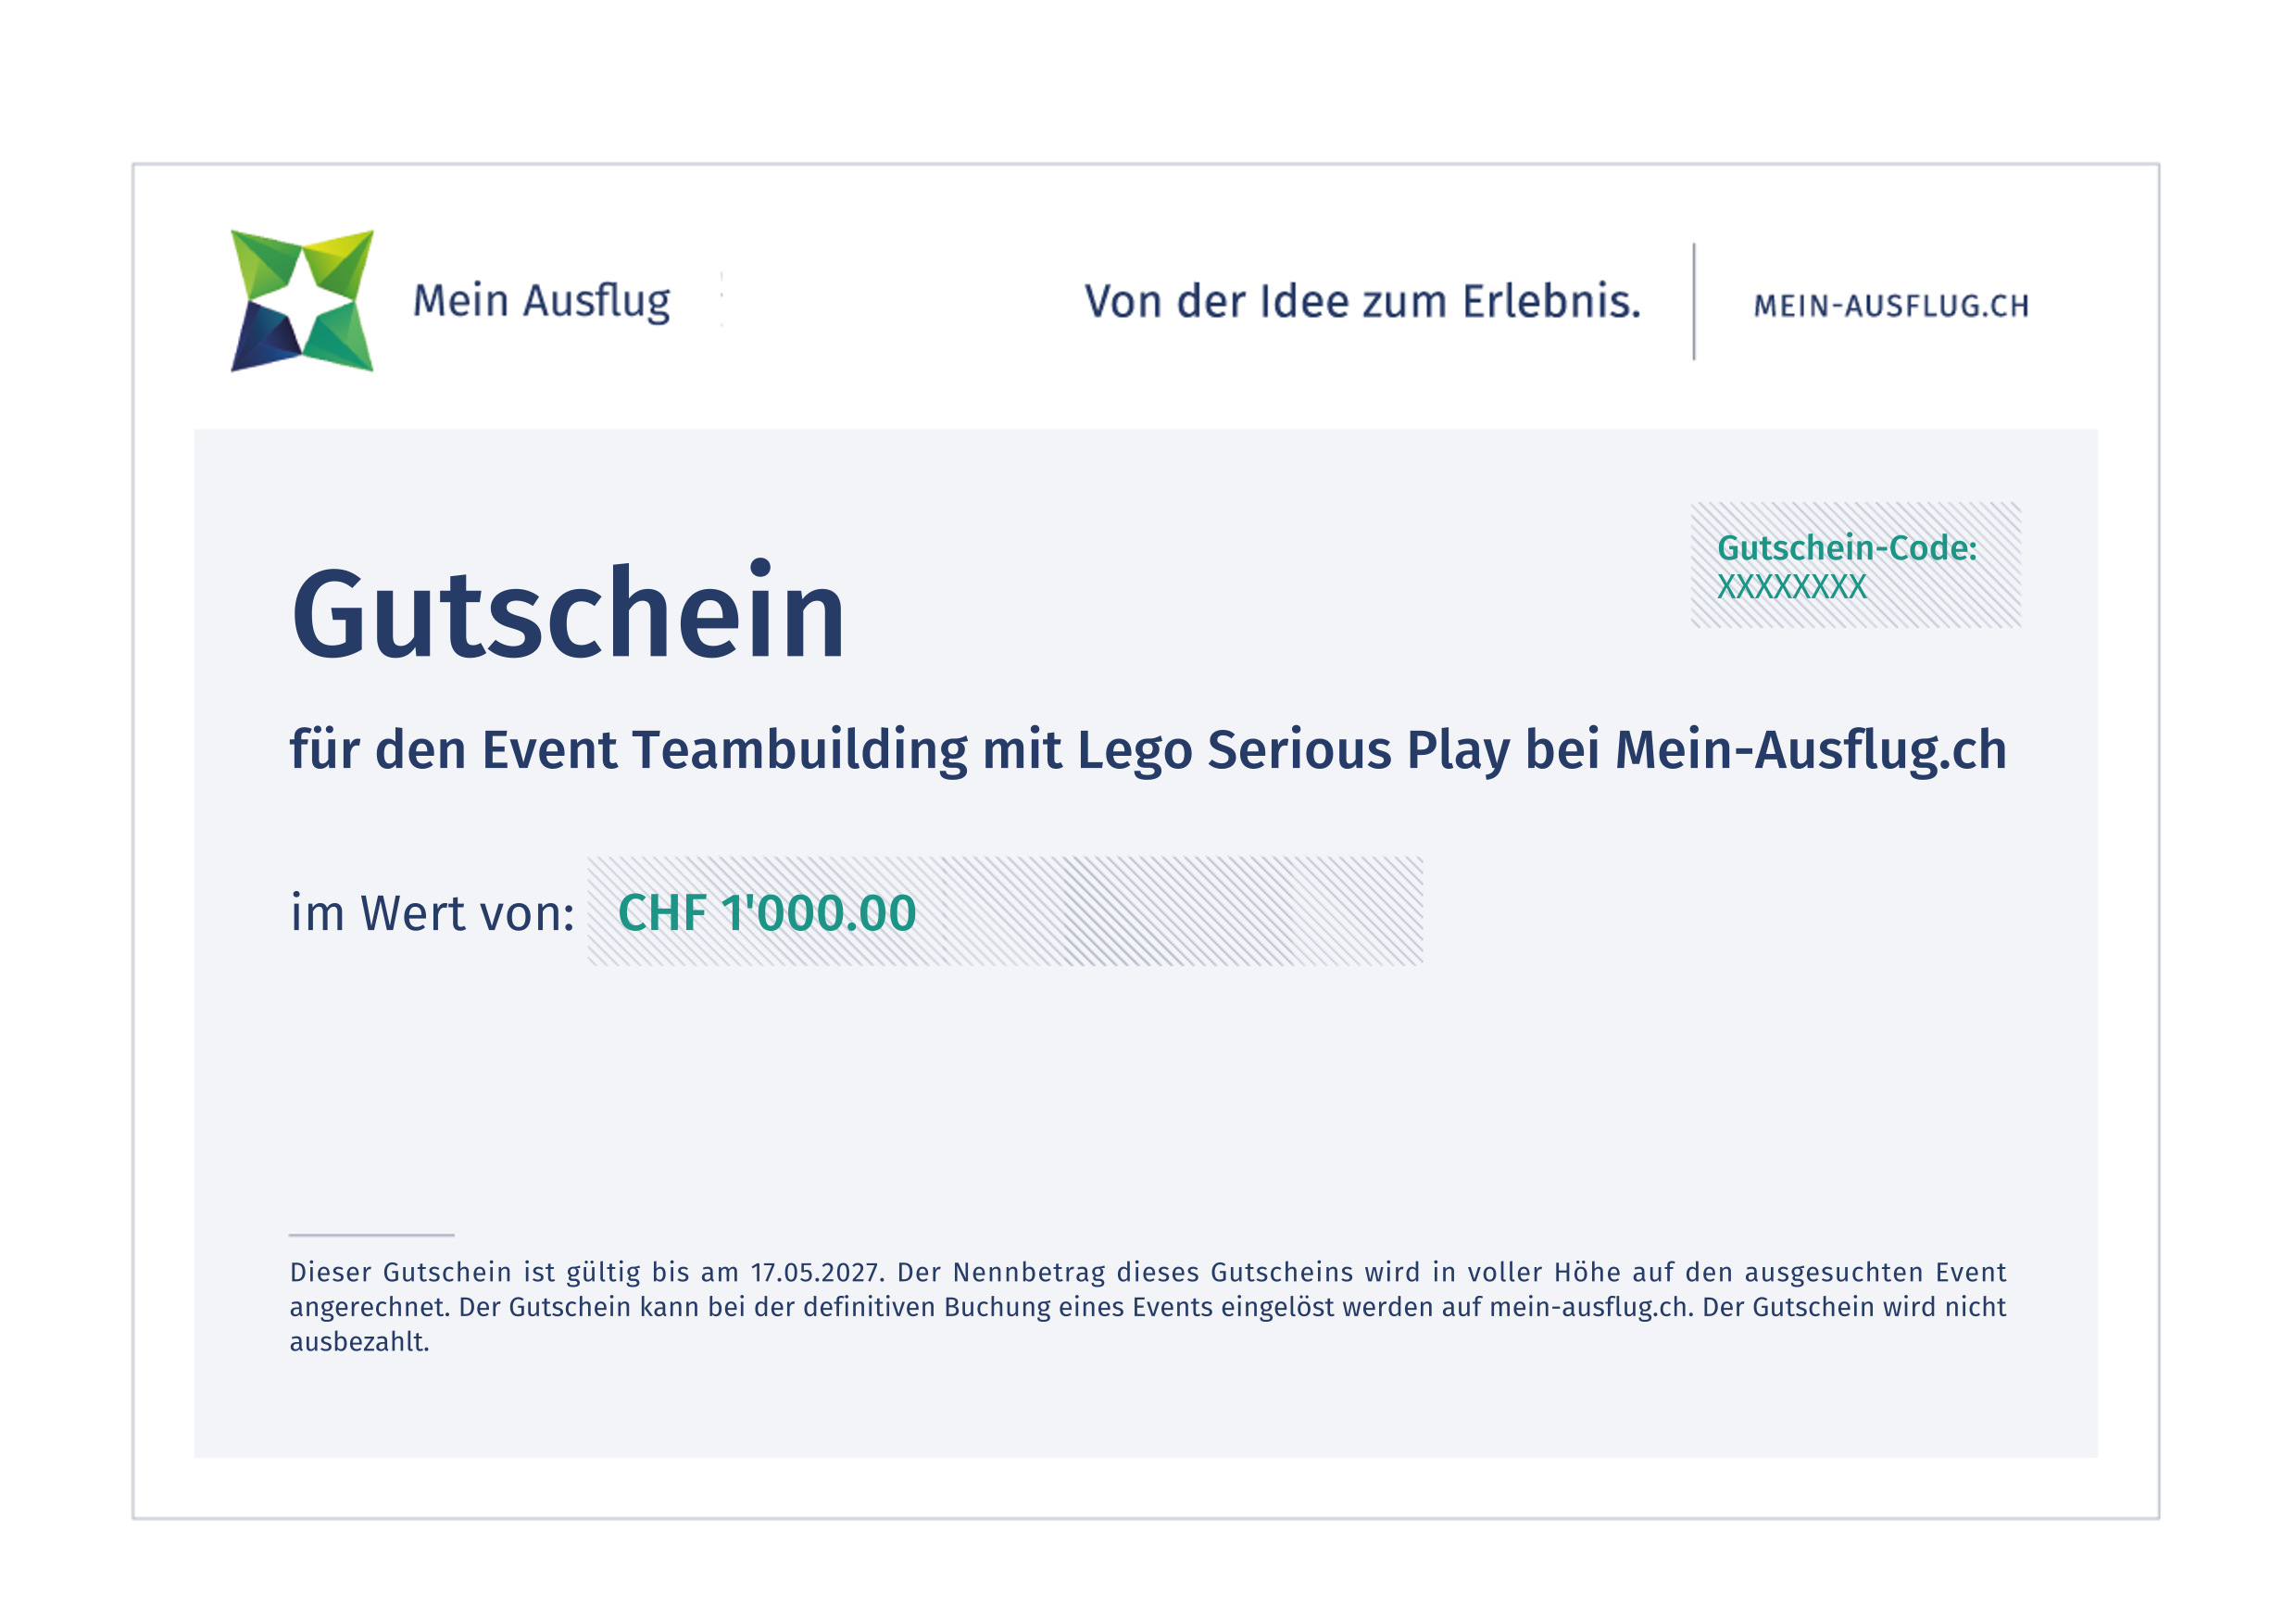 Teambuilding mit Lego Serious Play